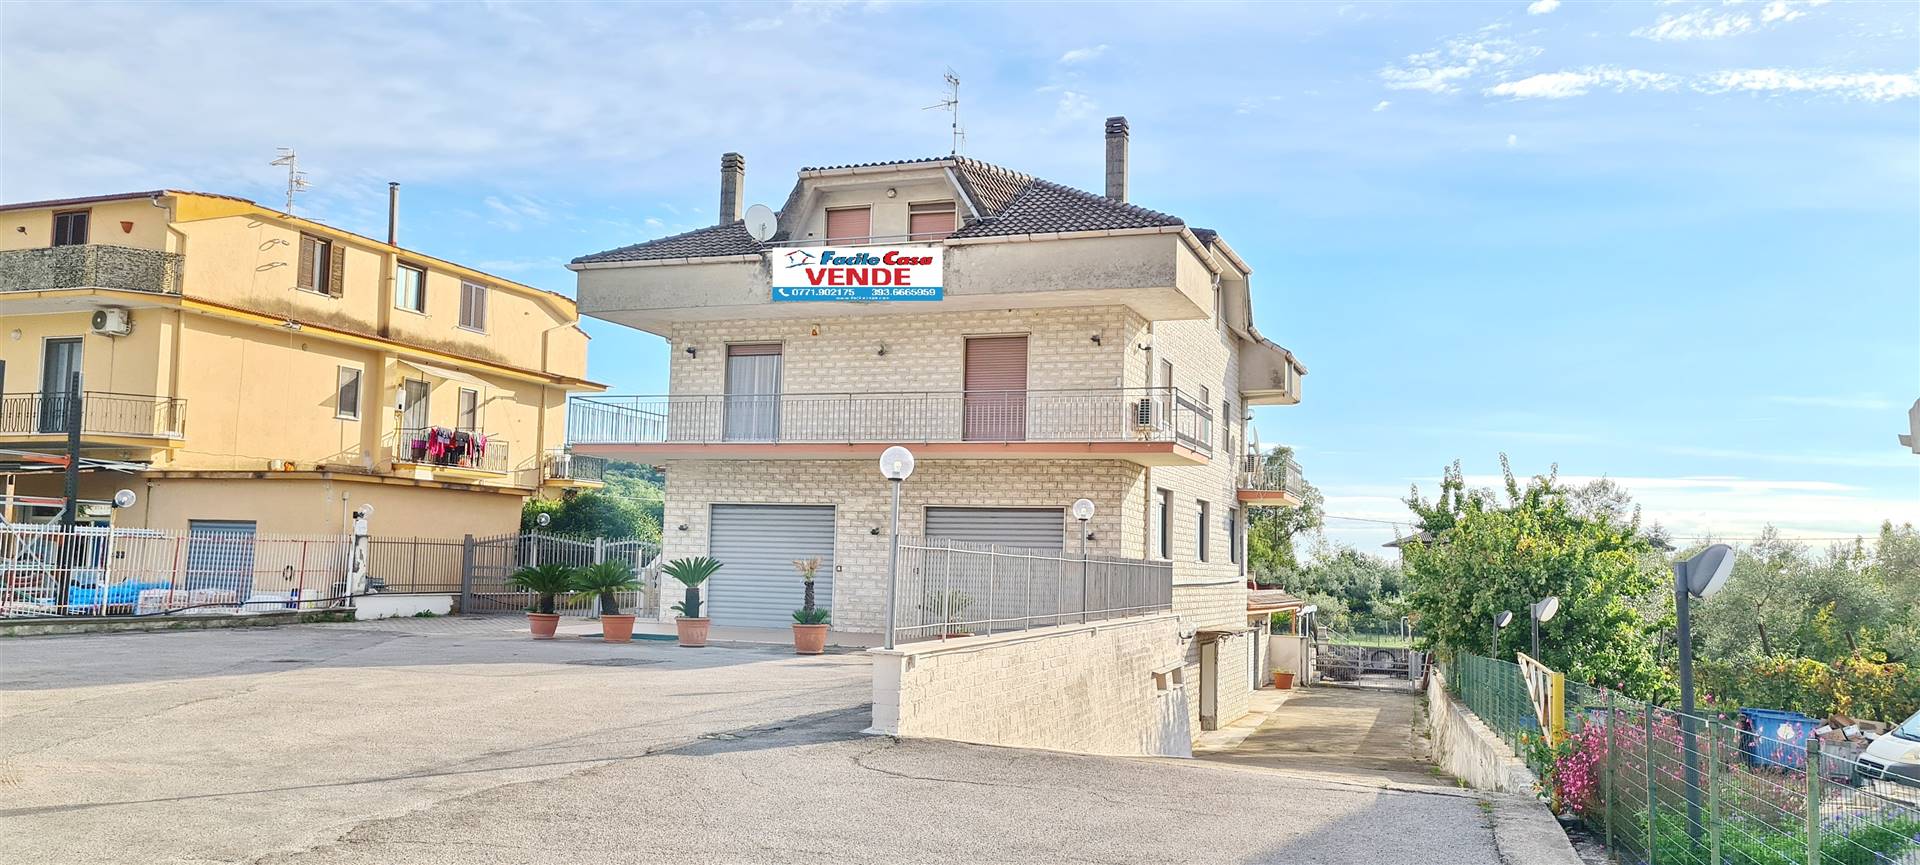 SANTA CROCE, FORMIA, Apartment for sale, Habitable, Heating Individual heating system, Energetic class: G, placed at 2° on 2, composed by: 4 Rooms, 